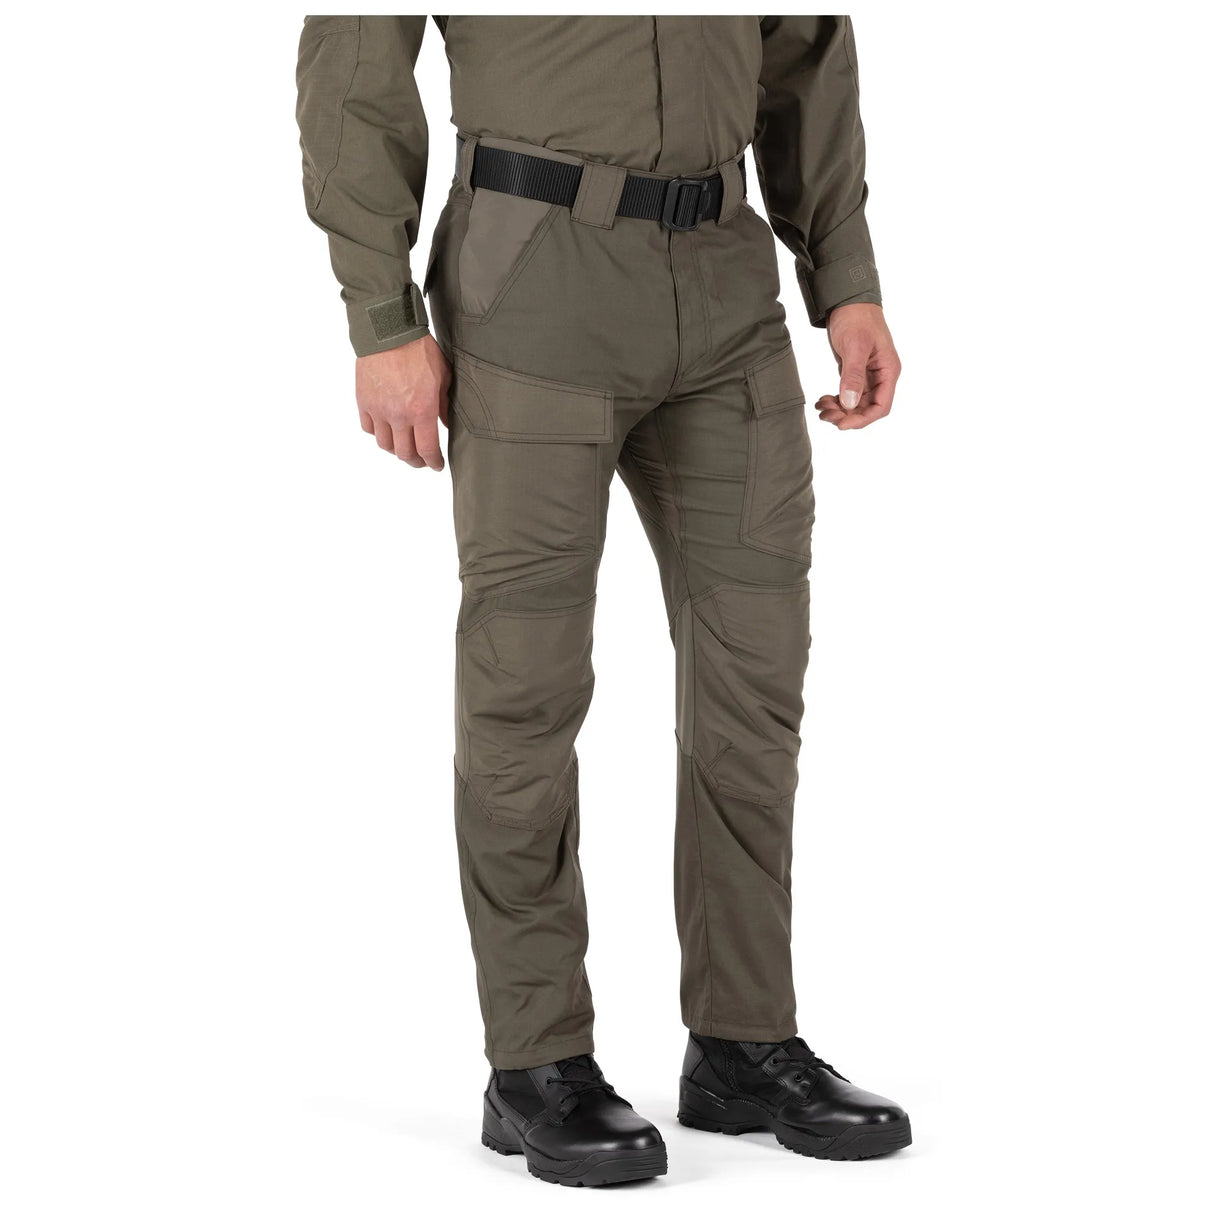 Tactical-Grit Pant: Designed for durability and functionality in challenging environments.